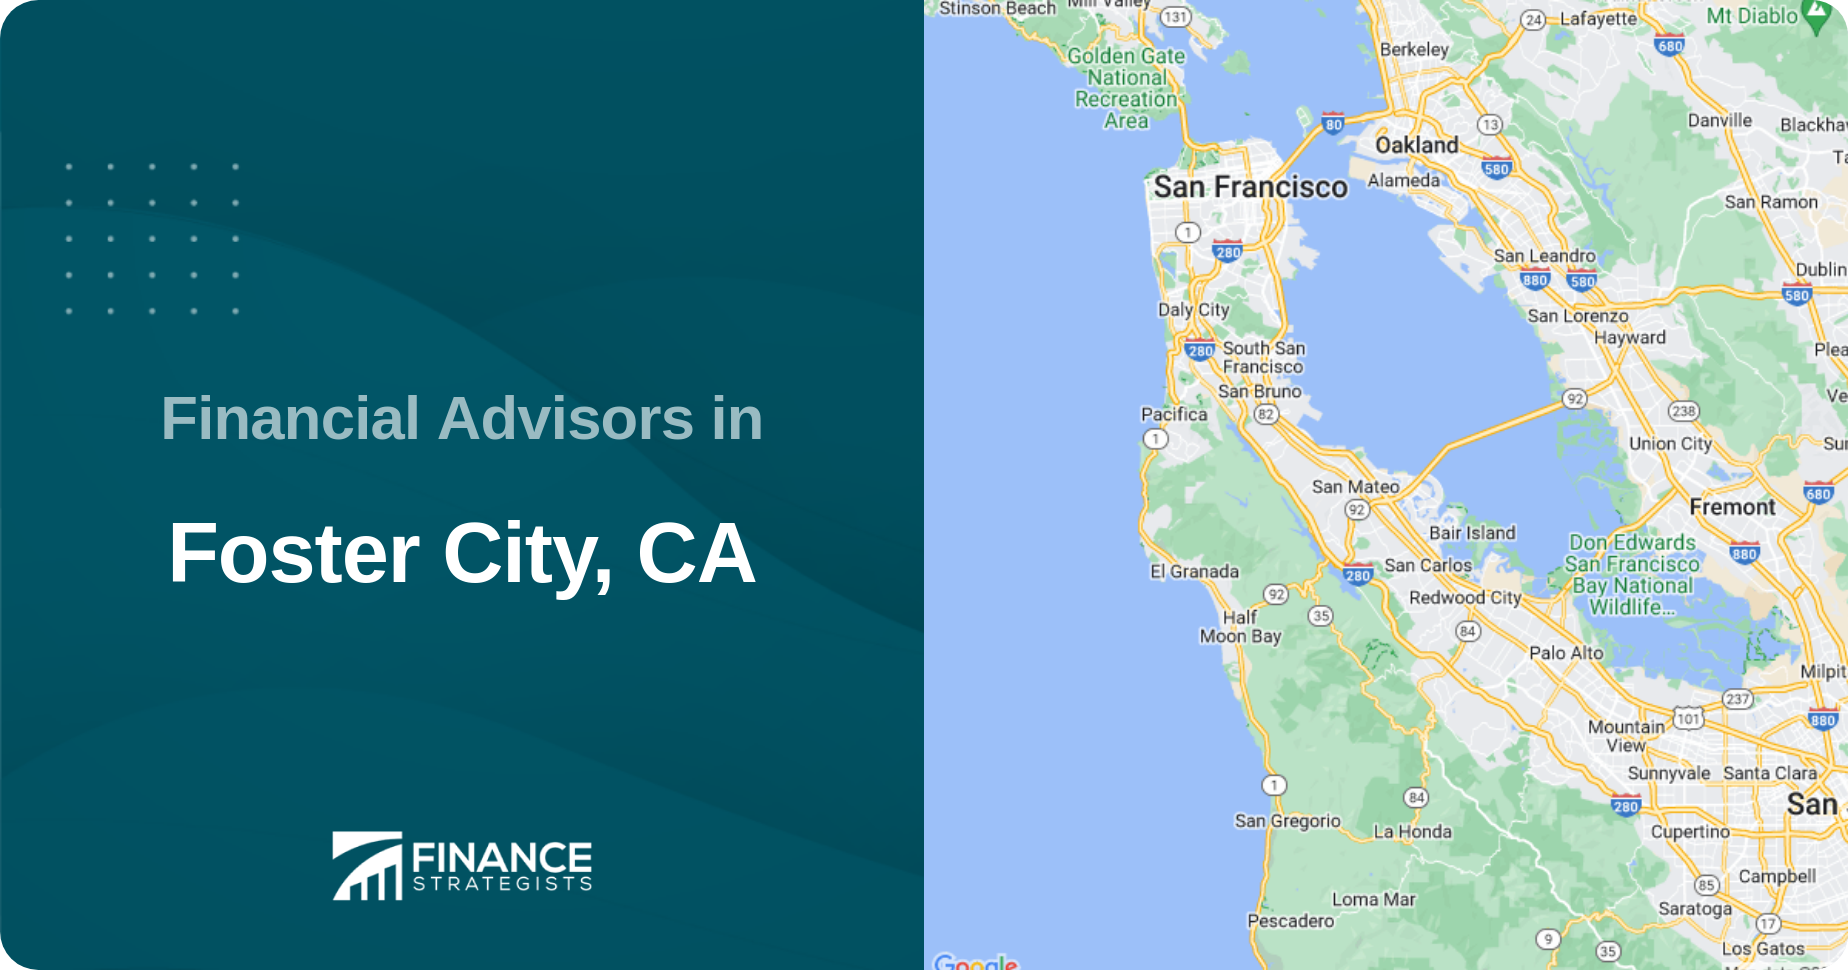 Financial Advisors in Foster City, CA